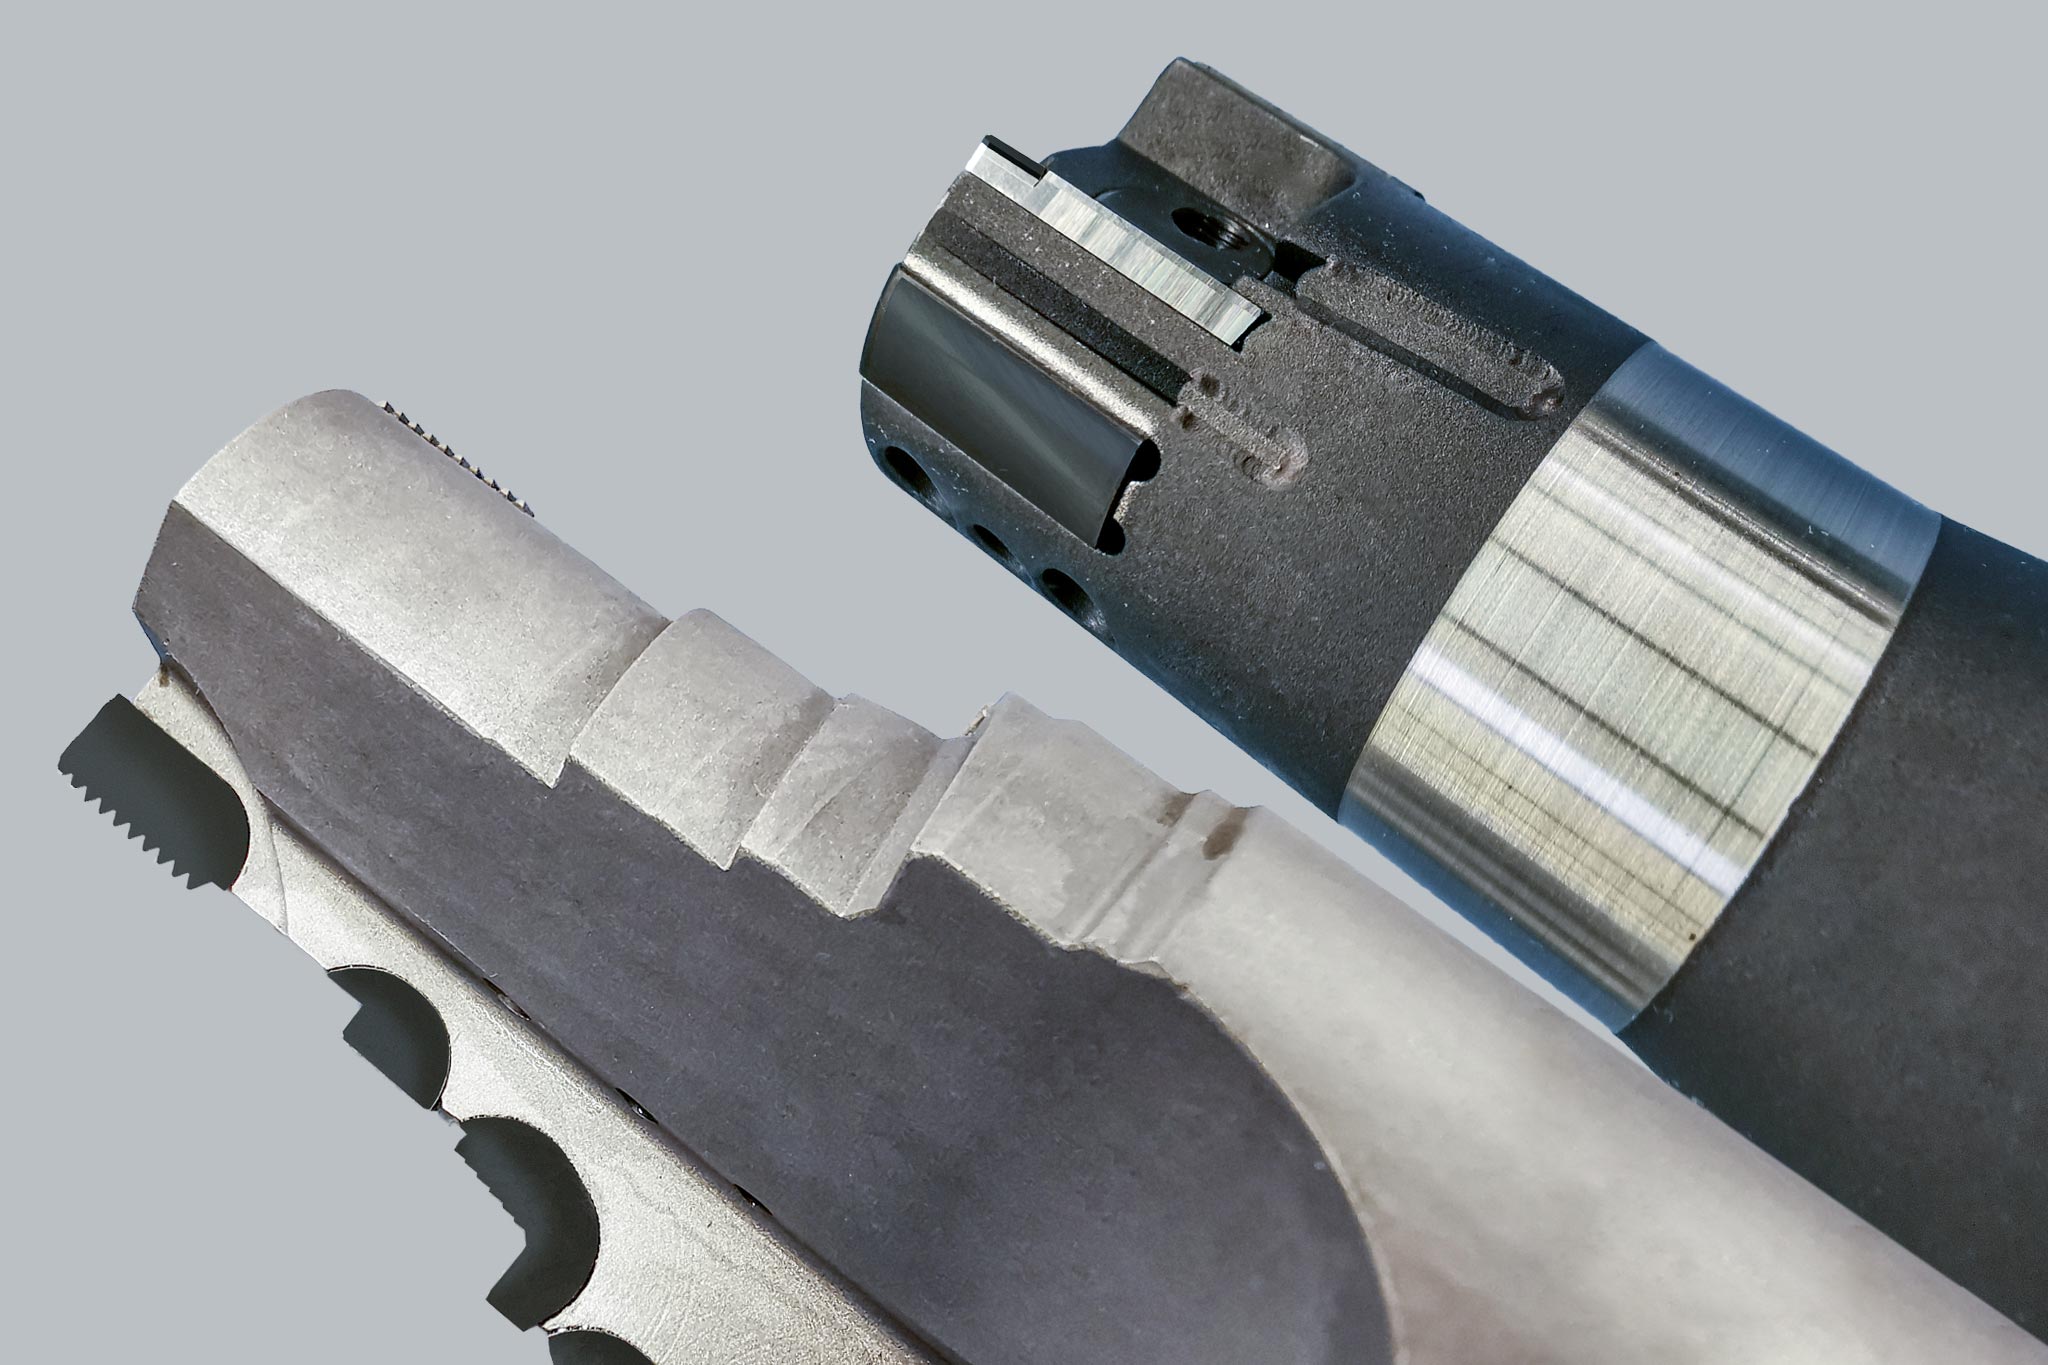 Two precision tools from MAPAL that are used for machining at Hirschmann.